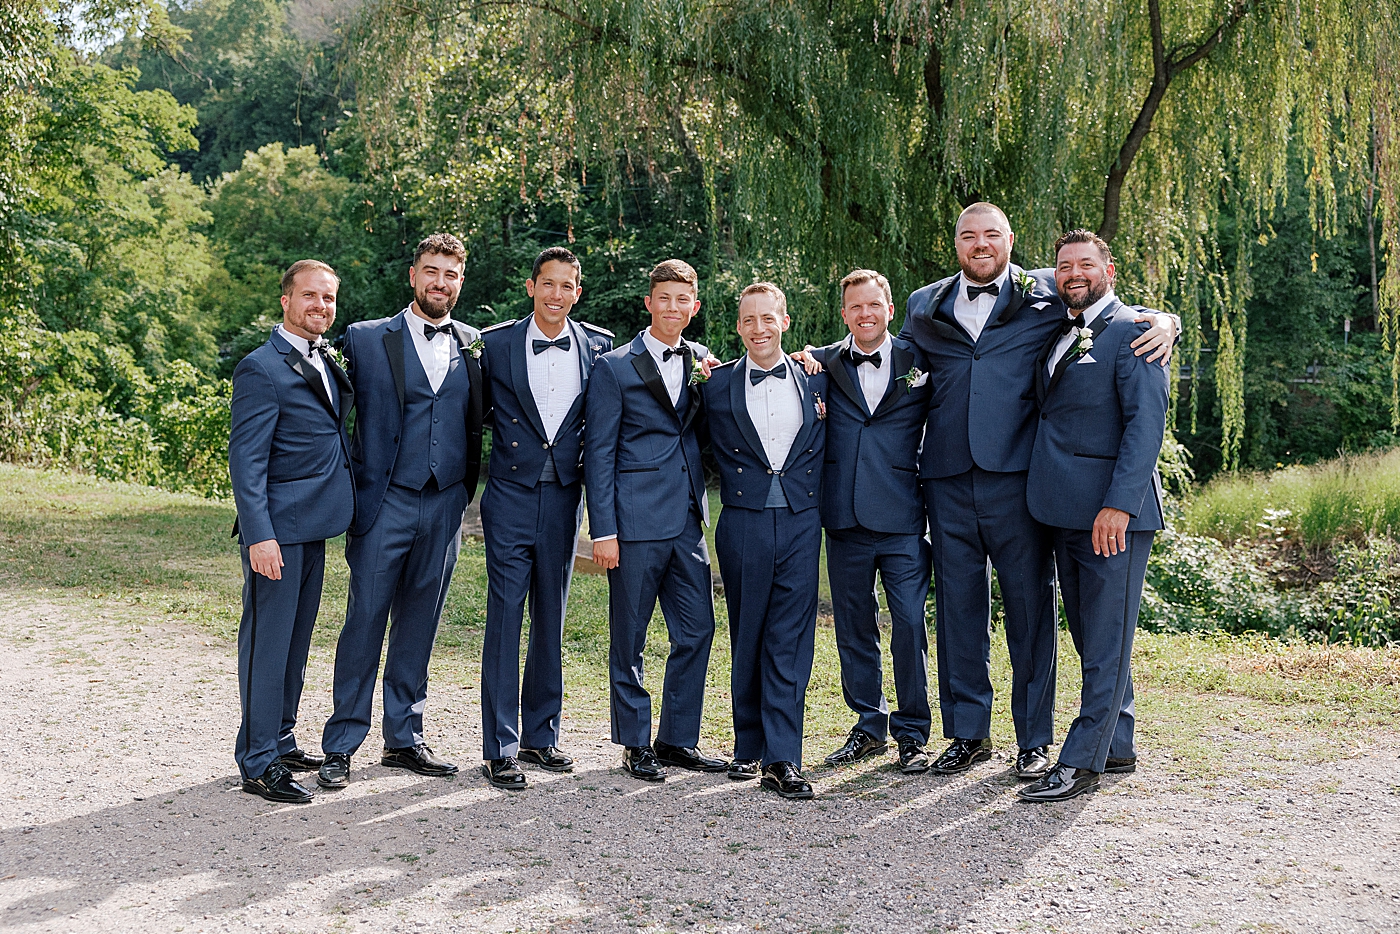 Groomsmen with their arms all around each other | Image by Hope Helmuth Photography